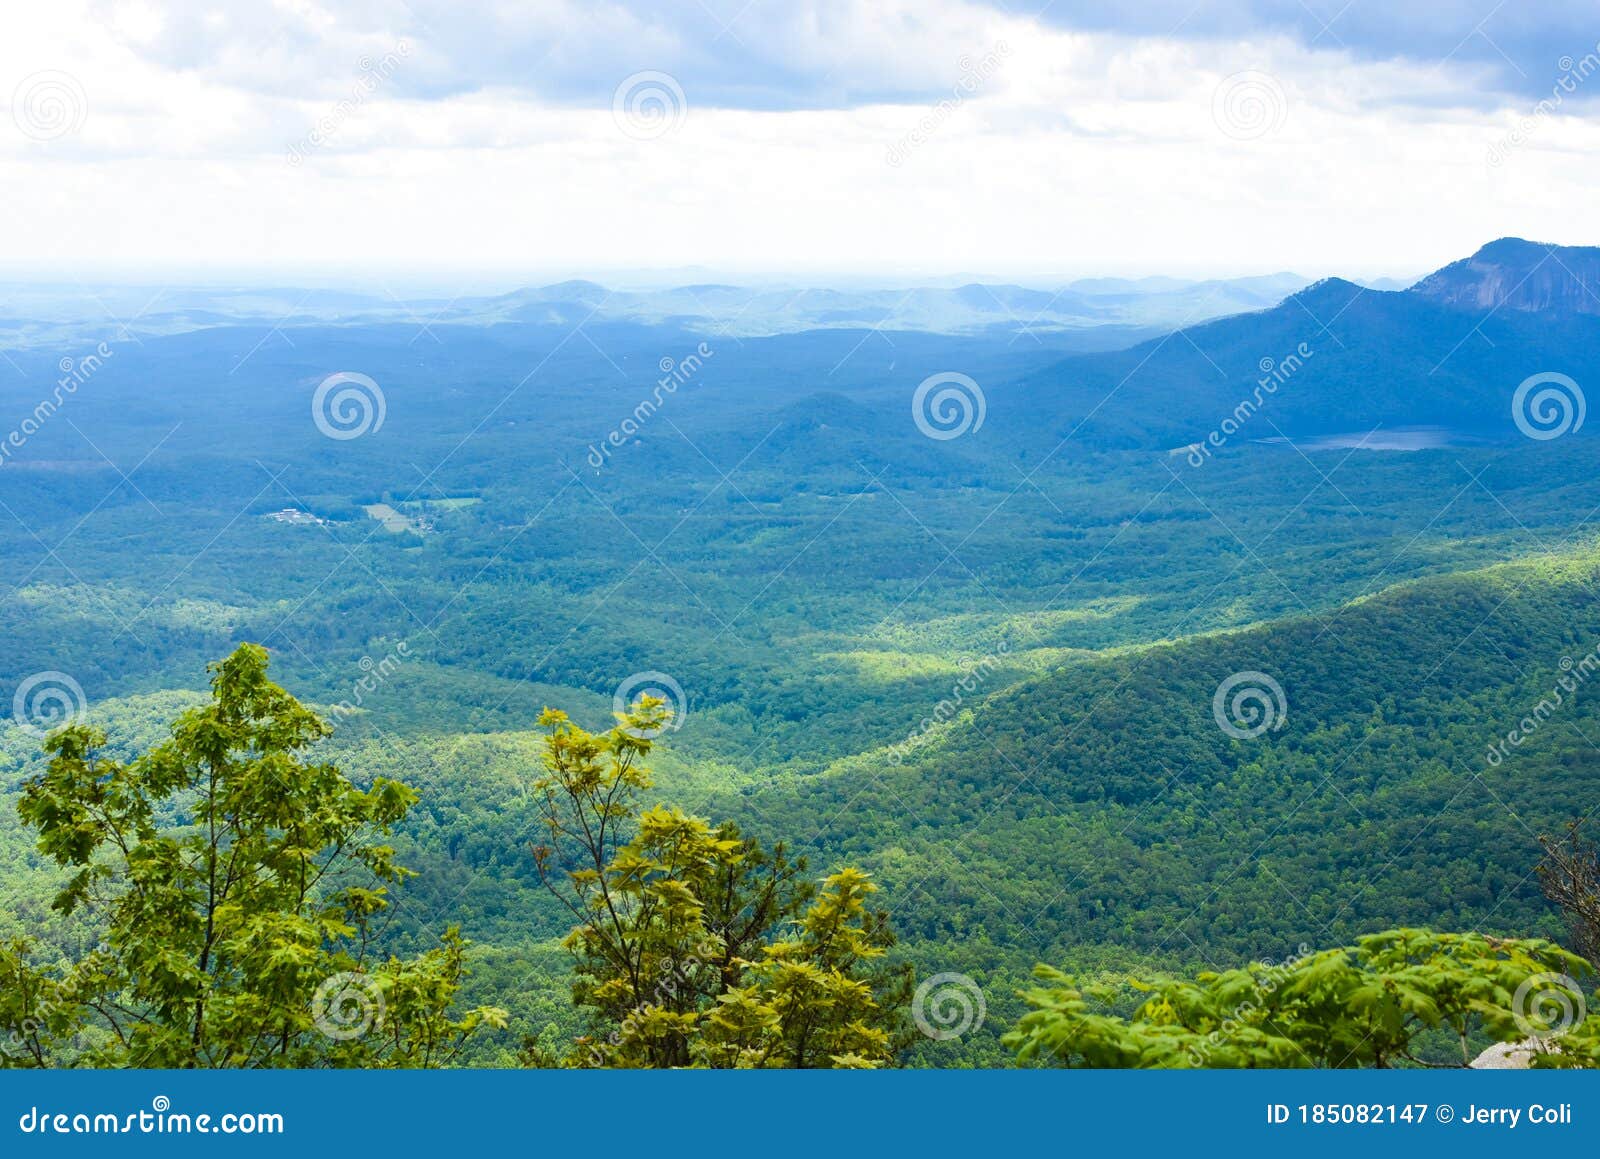 view from caesars head state park, cleveland, south carolina